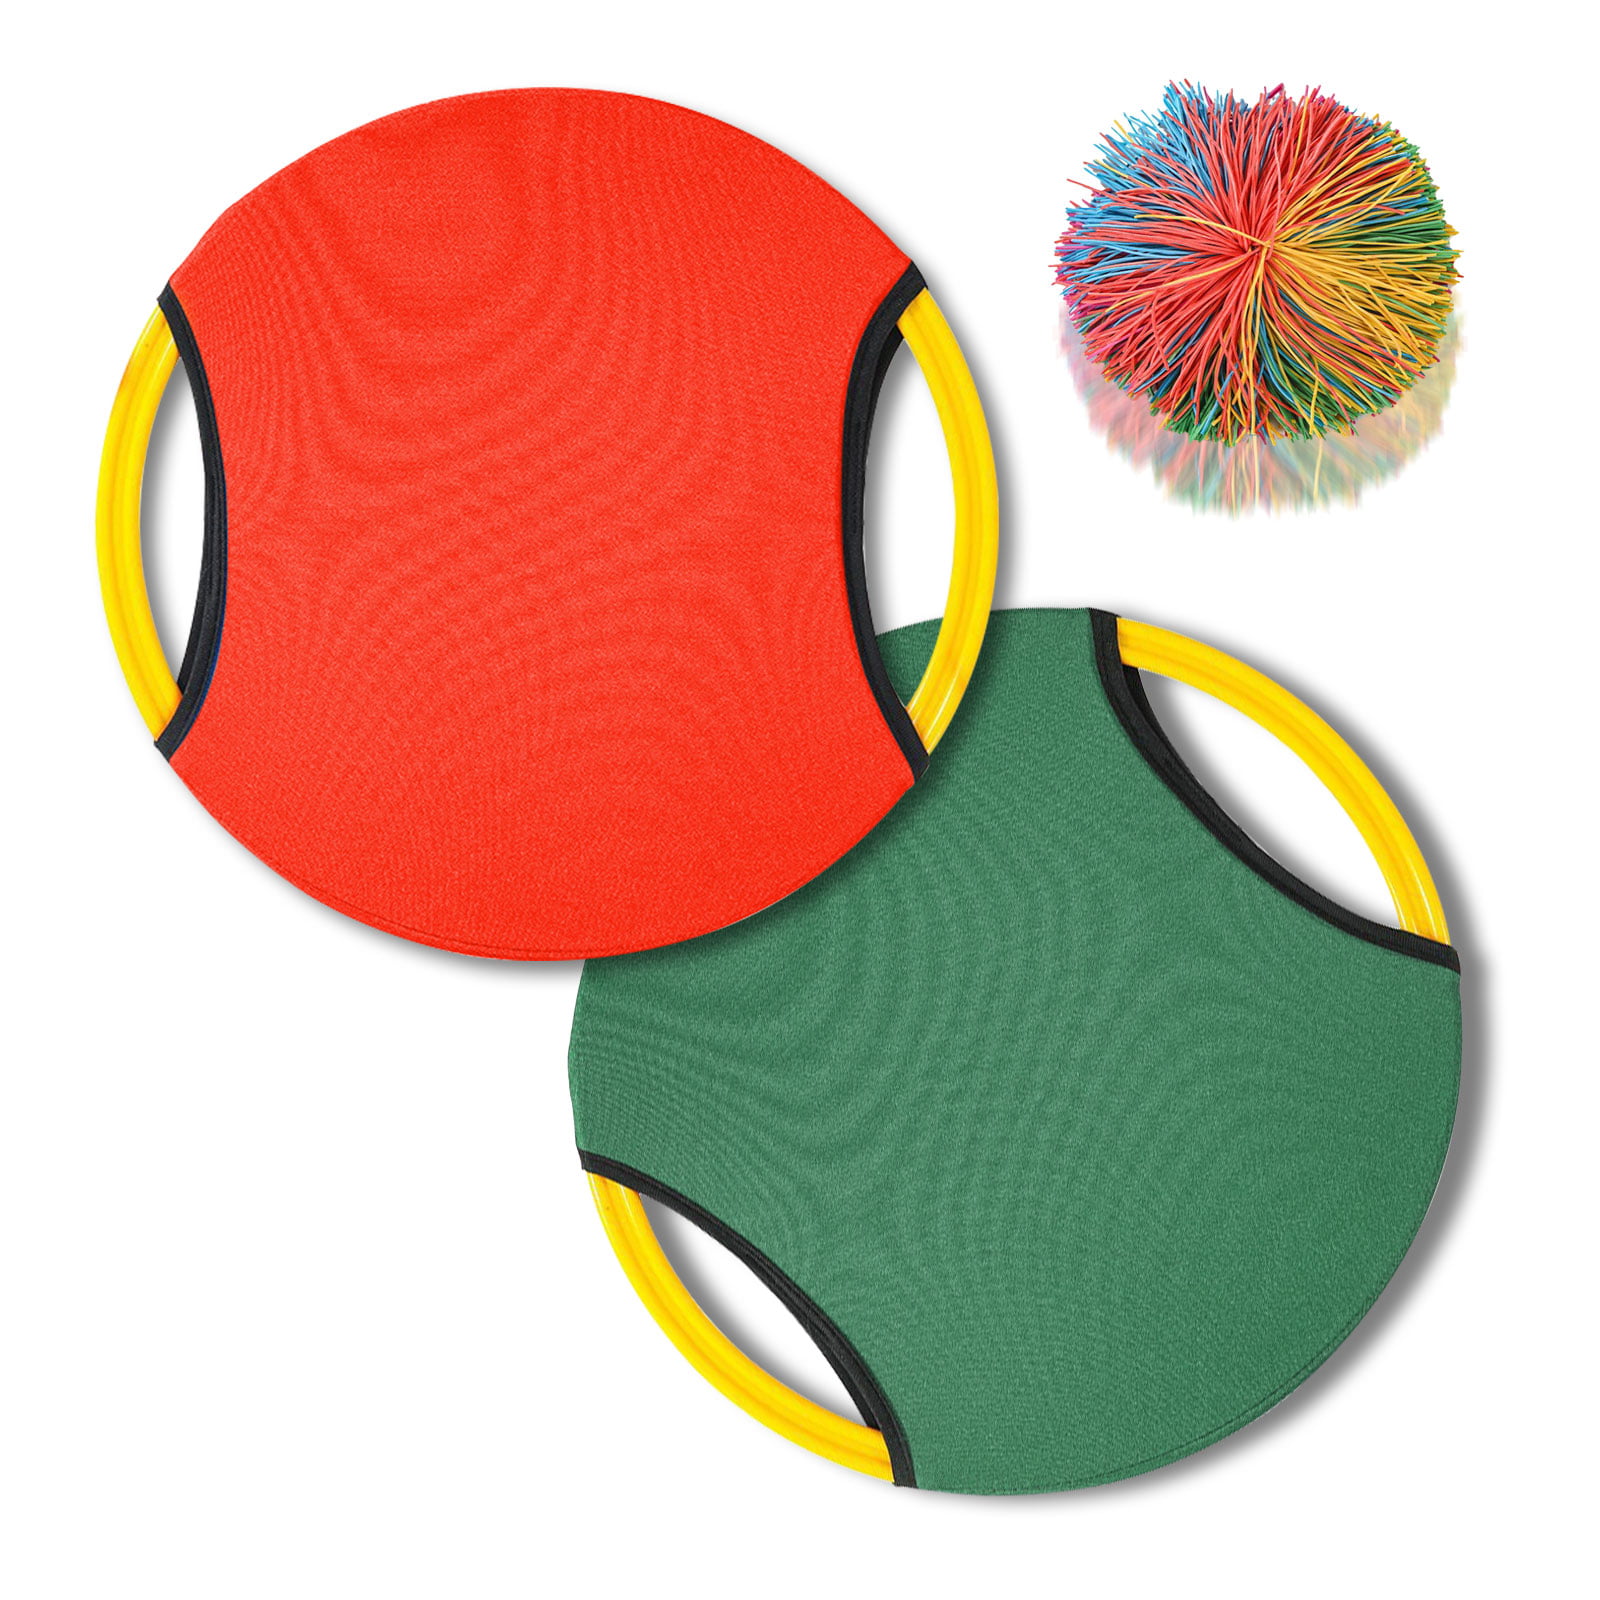 Fun Bouncy Paddle & Stringy Ball Toss & Catch Game - Easy to Use